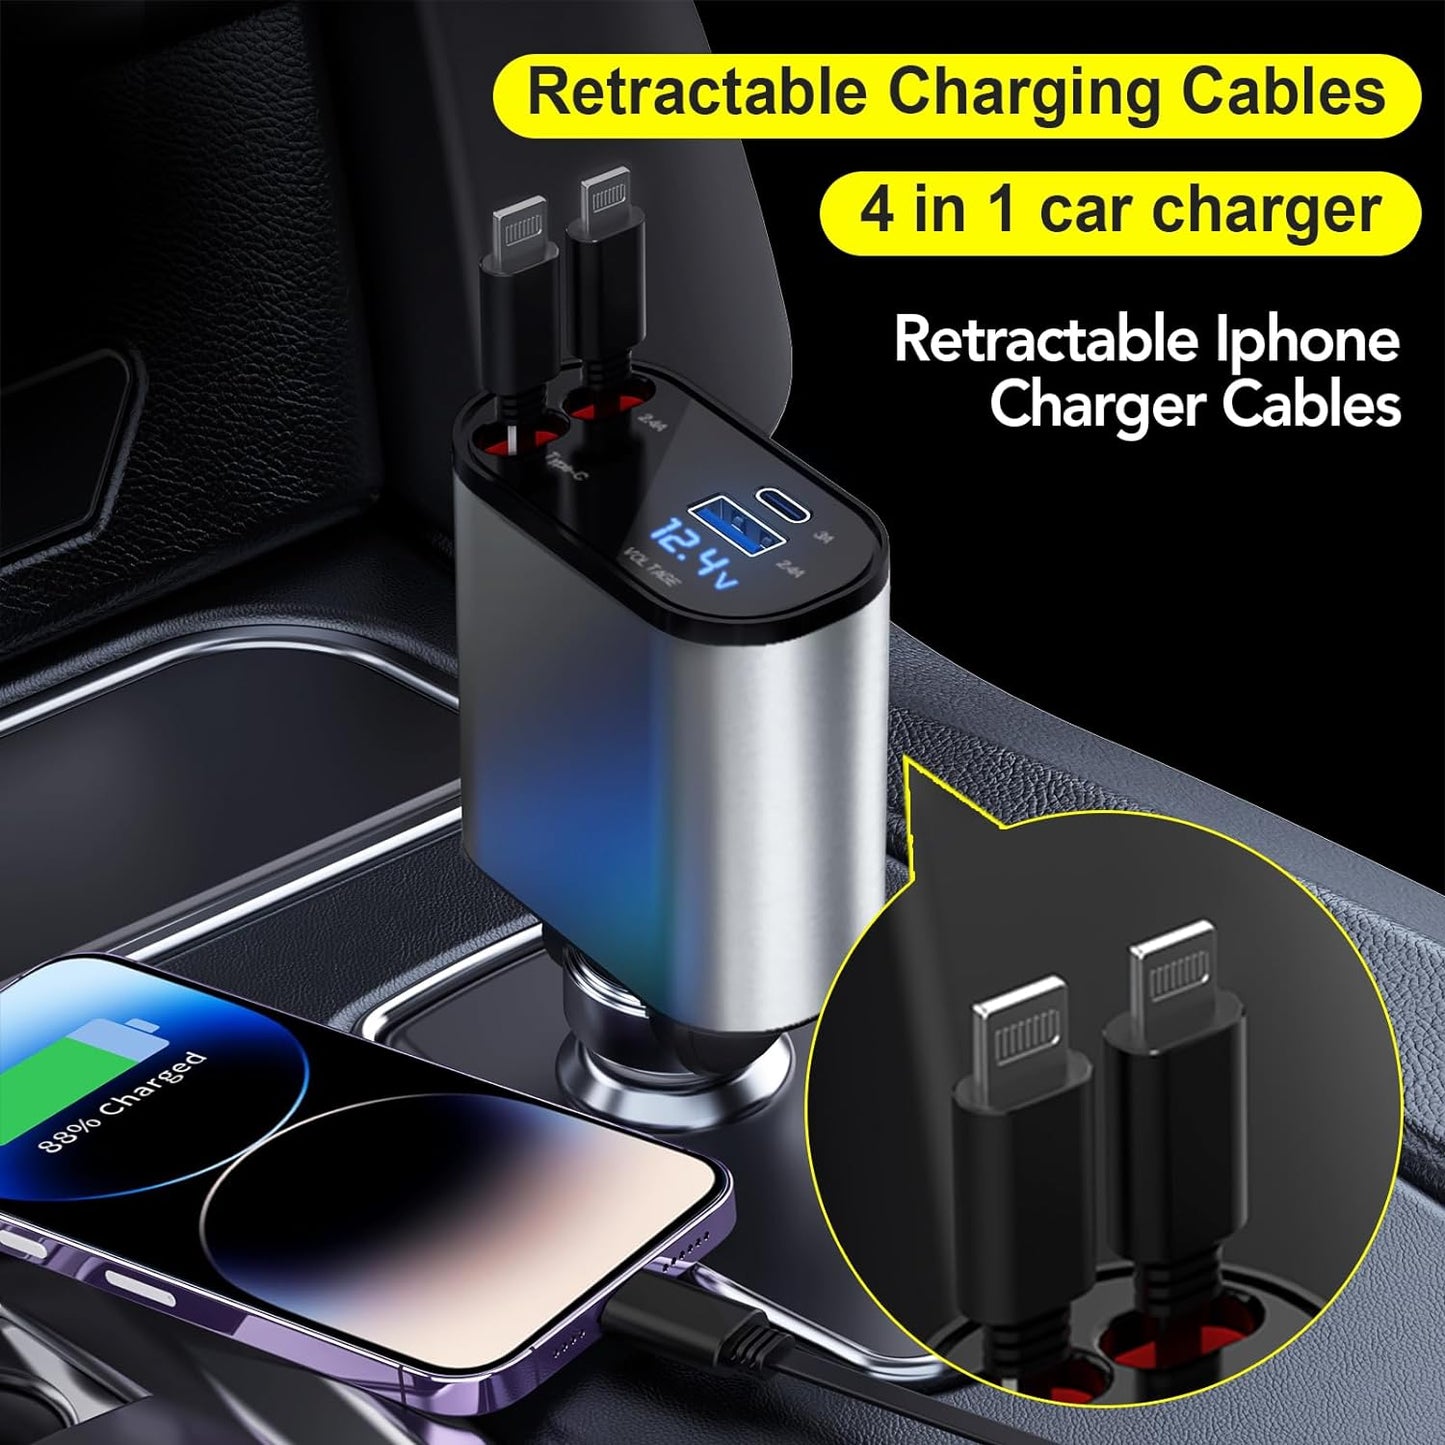 Retractable Car Charger, 4 in 1 Fast Car Phone Charger 60W, Retractable Cables and USB Car Charger,Compatible with iPhone 15/14/13/12/11,Galaxy,Pixel.Travel/Portable.Car accessories.For gifts